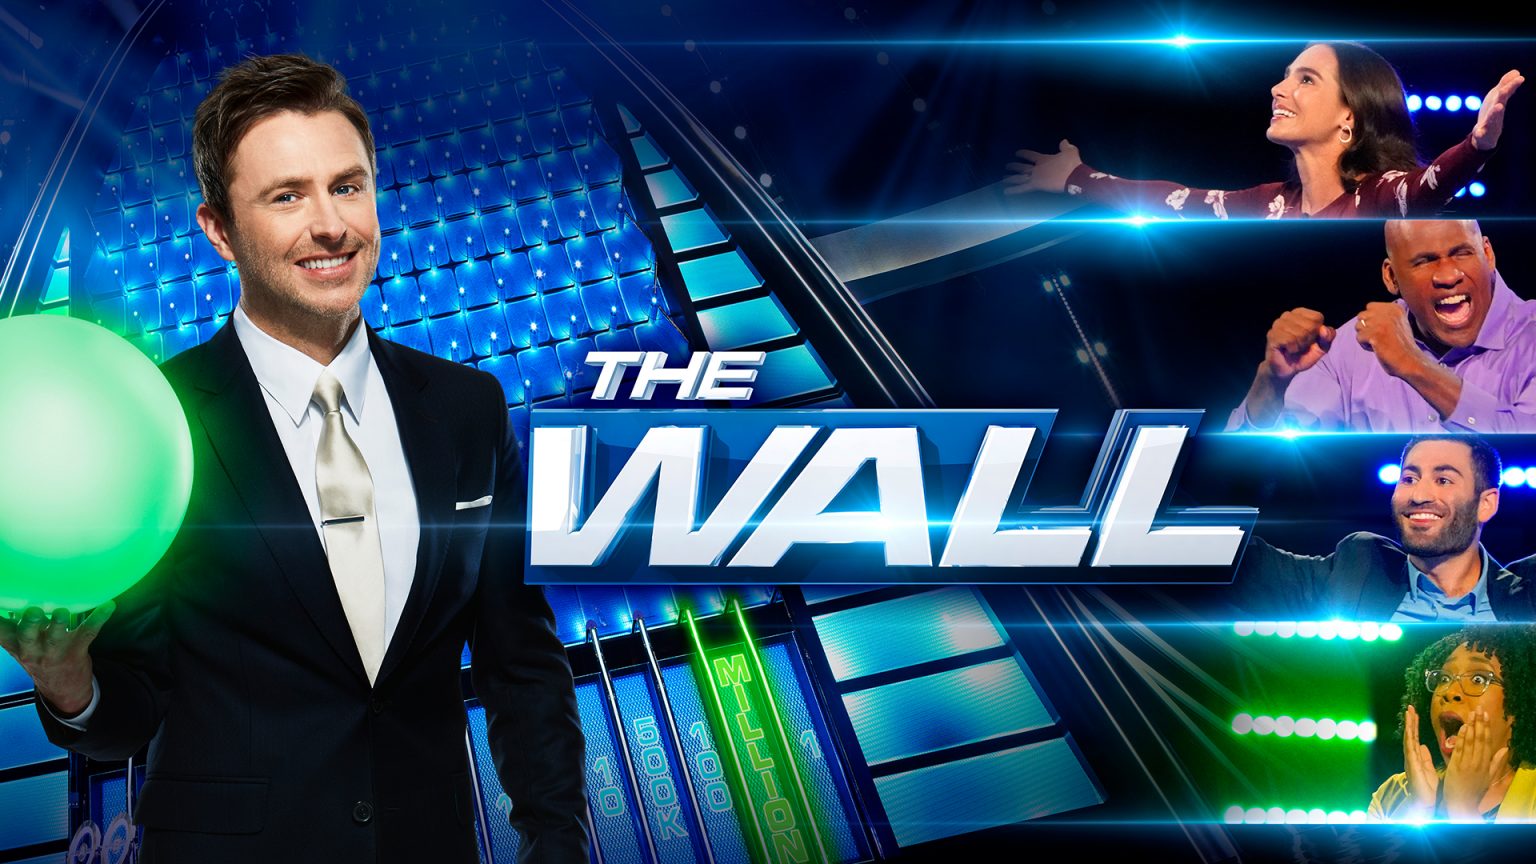 Casting Call for NBC’s The Wall, Virtually